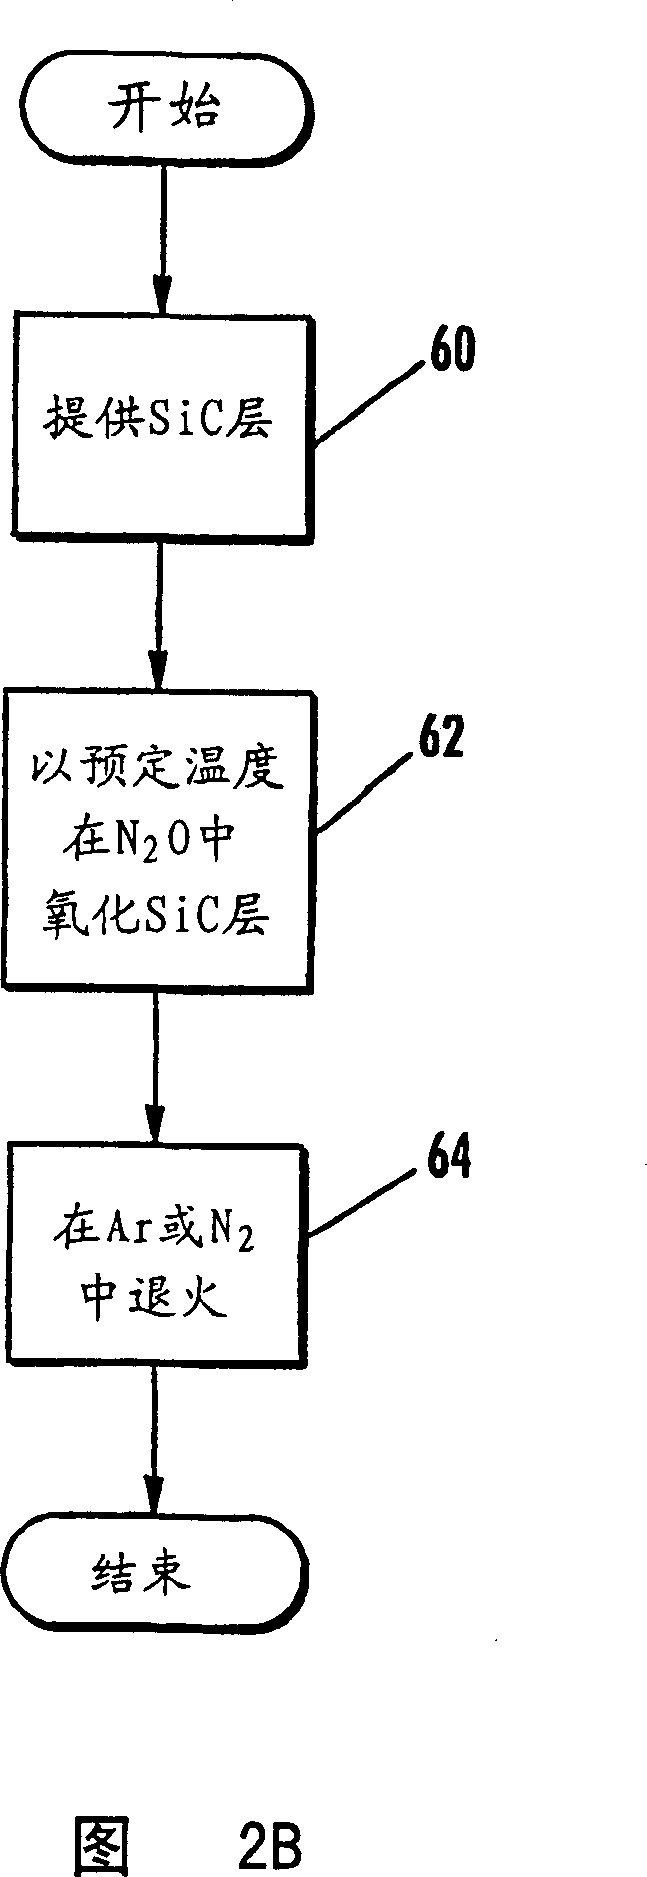 Method of fabricating an oxide layer on a silicon carbide layer utilizing NO2